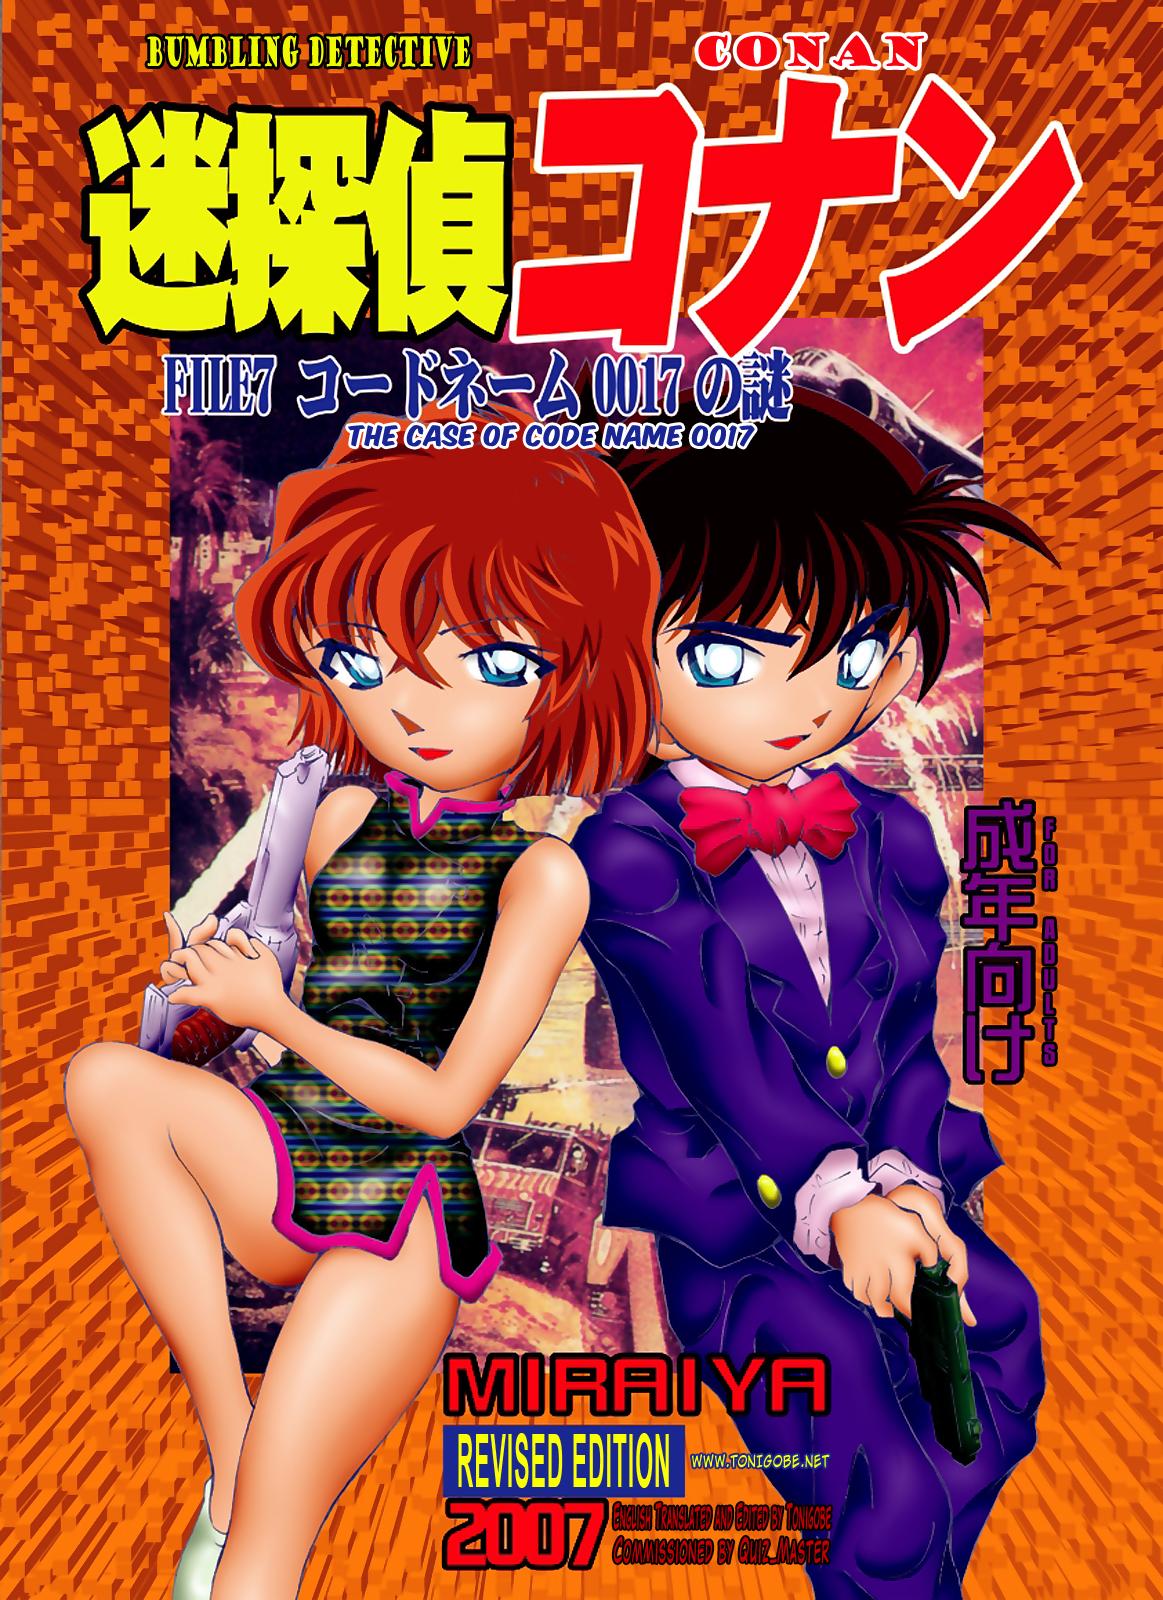 Anal Licking Bumbling Detective Conan - File 7: The Case of Code Name 0017 - Detective conan Stepson - Picture 1